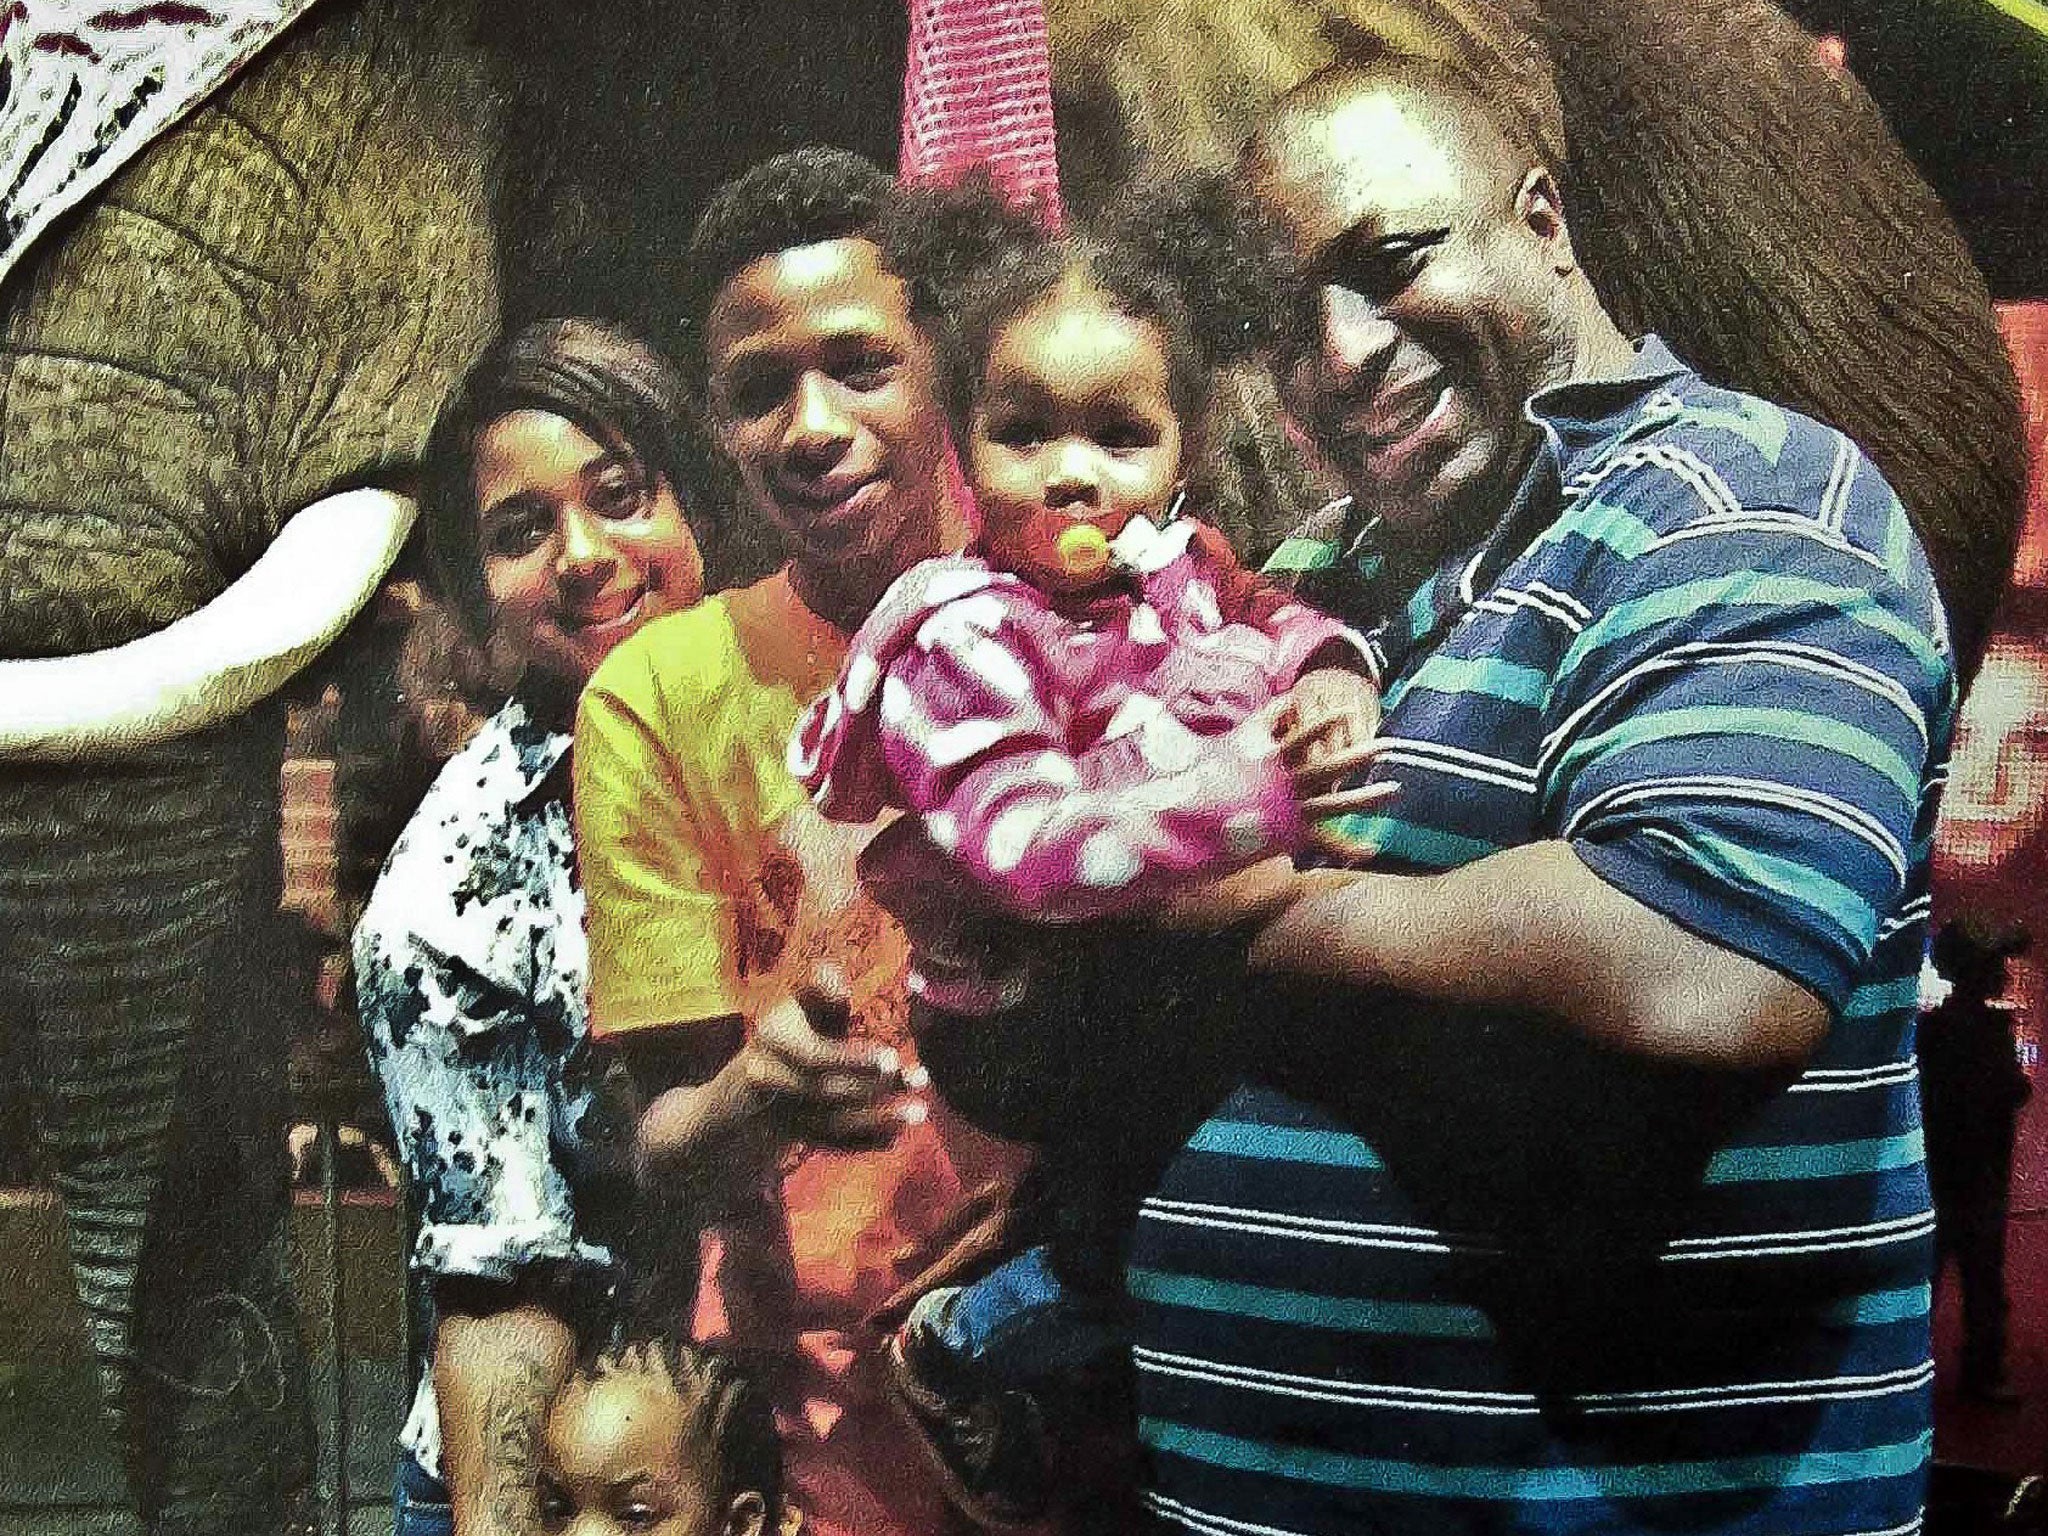 Eric Garner, right, with some of his six children during a family
outing